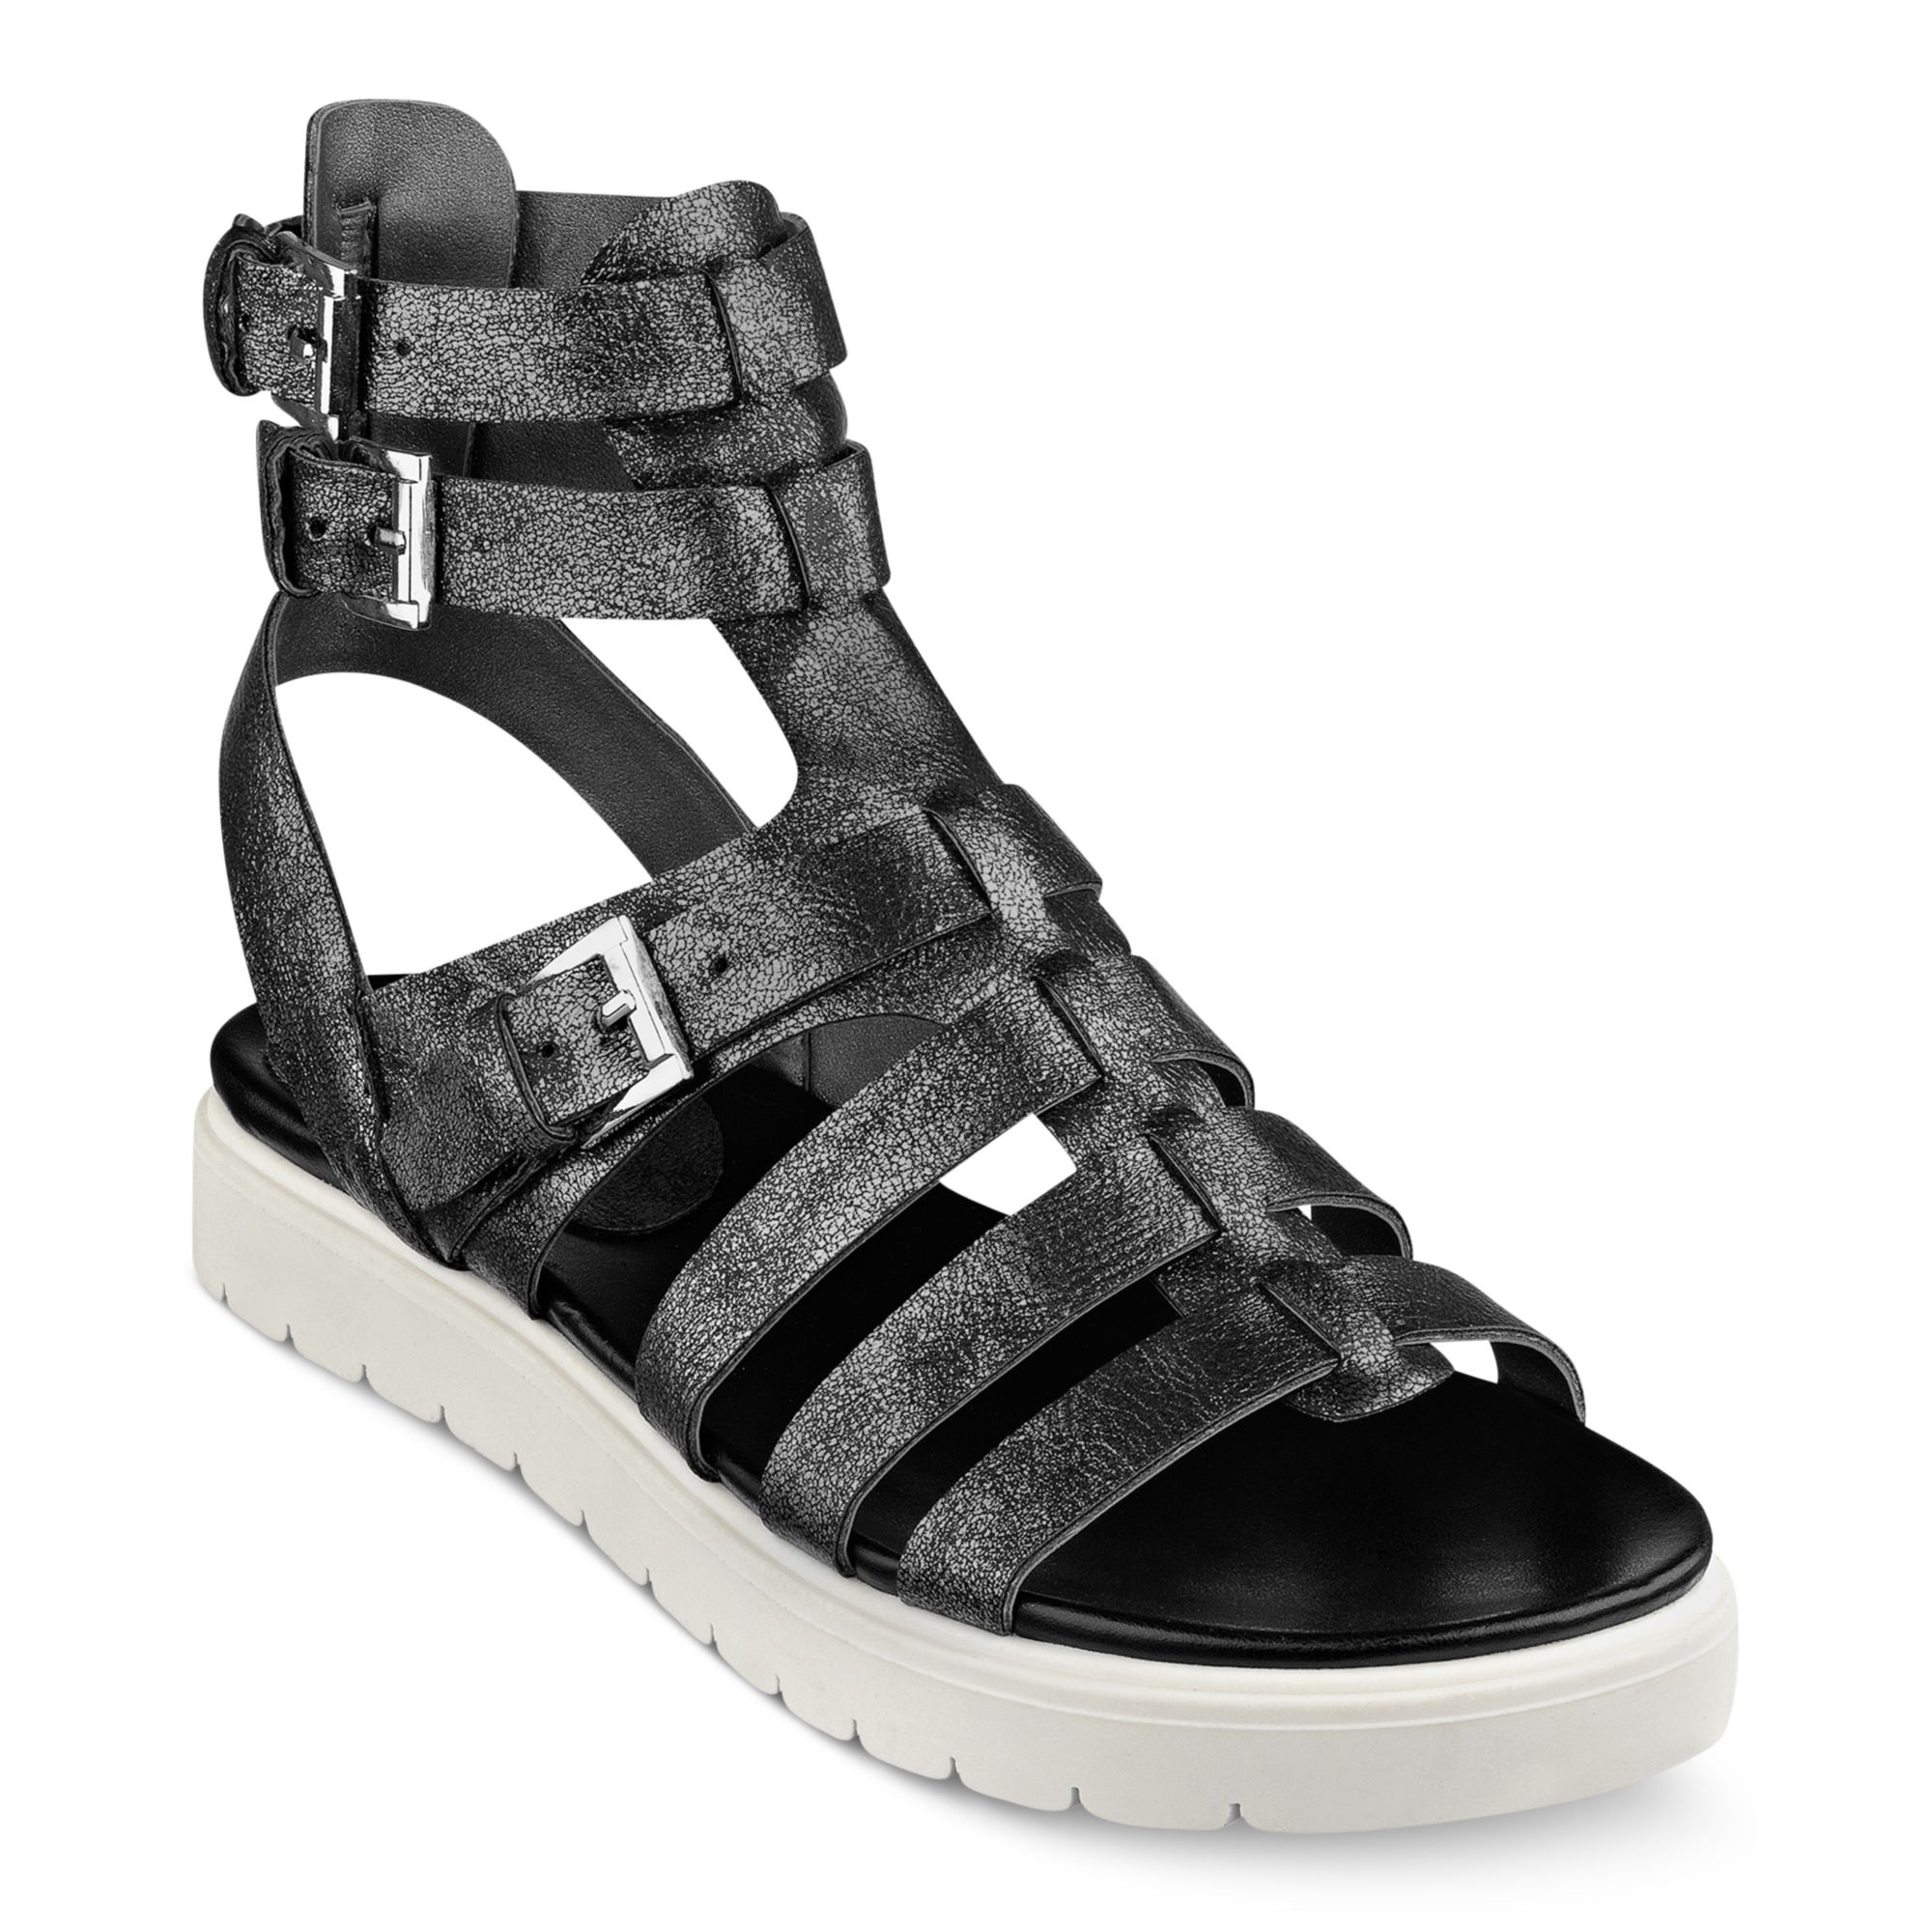 By Guess Womens Mexico Flatform Gladiator Sandals in Gray (Pewter ...